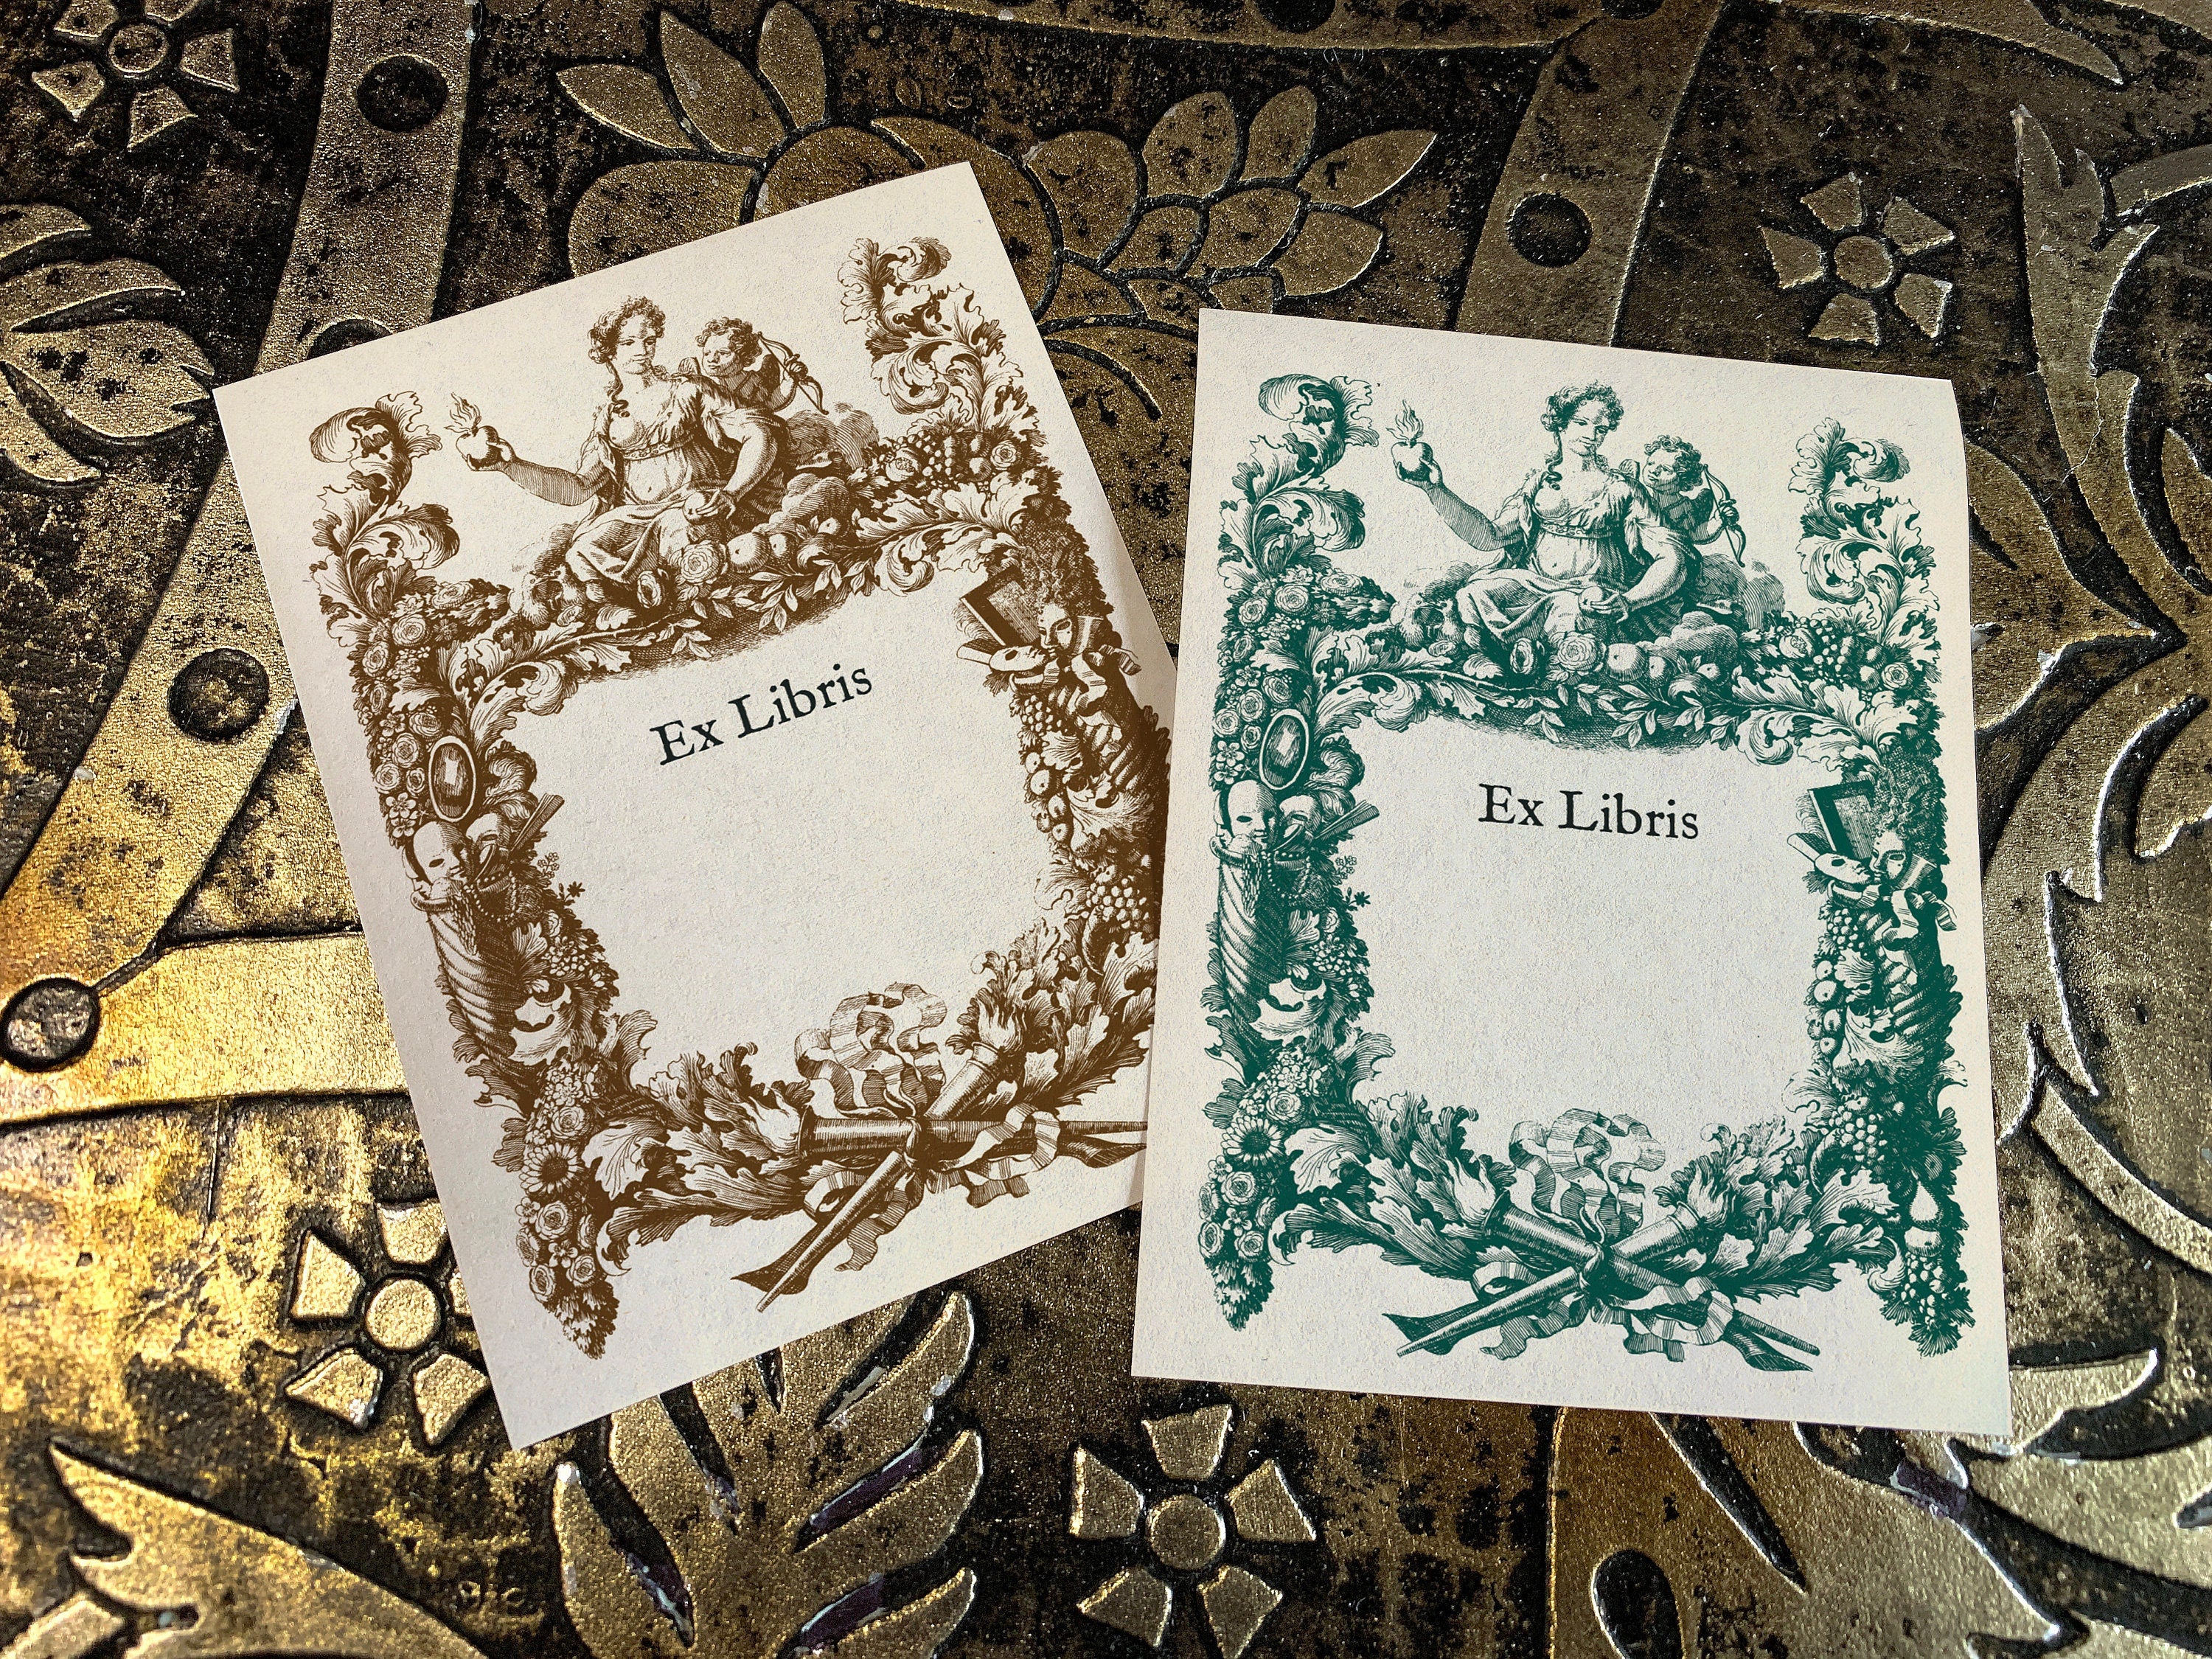 Venus in Love, Personalized Ex-Libris Bookplates, Crafted on Traditional Gummed Paper, 3in x 4in, Set of 30, Four Colors Available